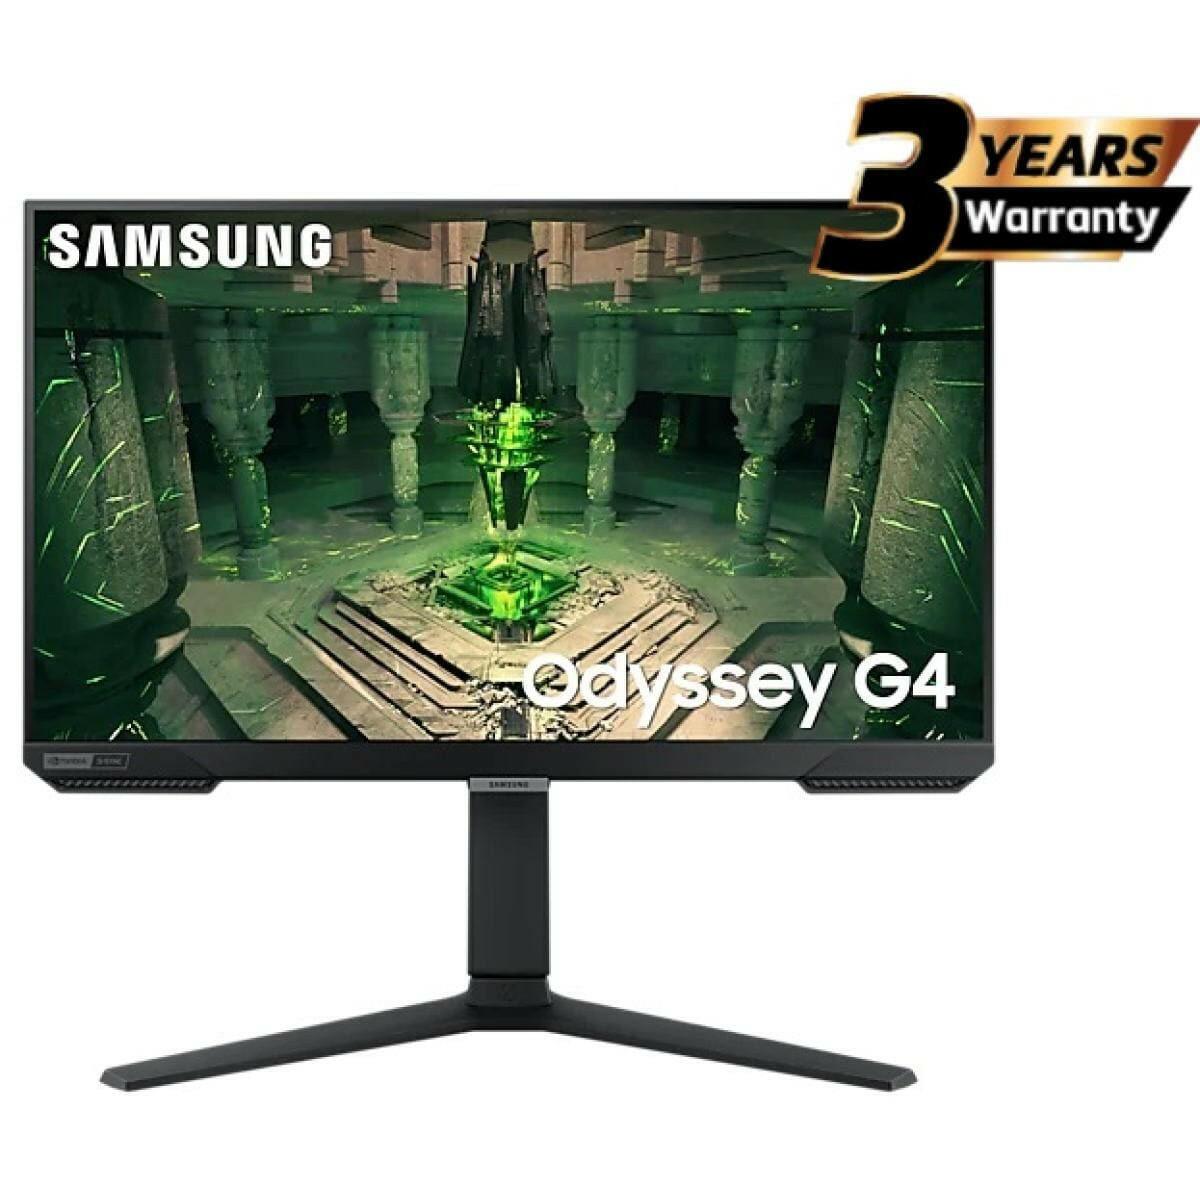 SAMSUNG Computer Monitors Samsung Odyssey G4 27" FHD Flat Monitor, IPS, 240Hz, 1ms(GTG), HDR10, 99% sRGB, G-Sync Compatible, UltraWide Game View ,w/ Ergonomic Stand